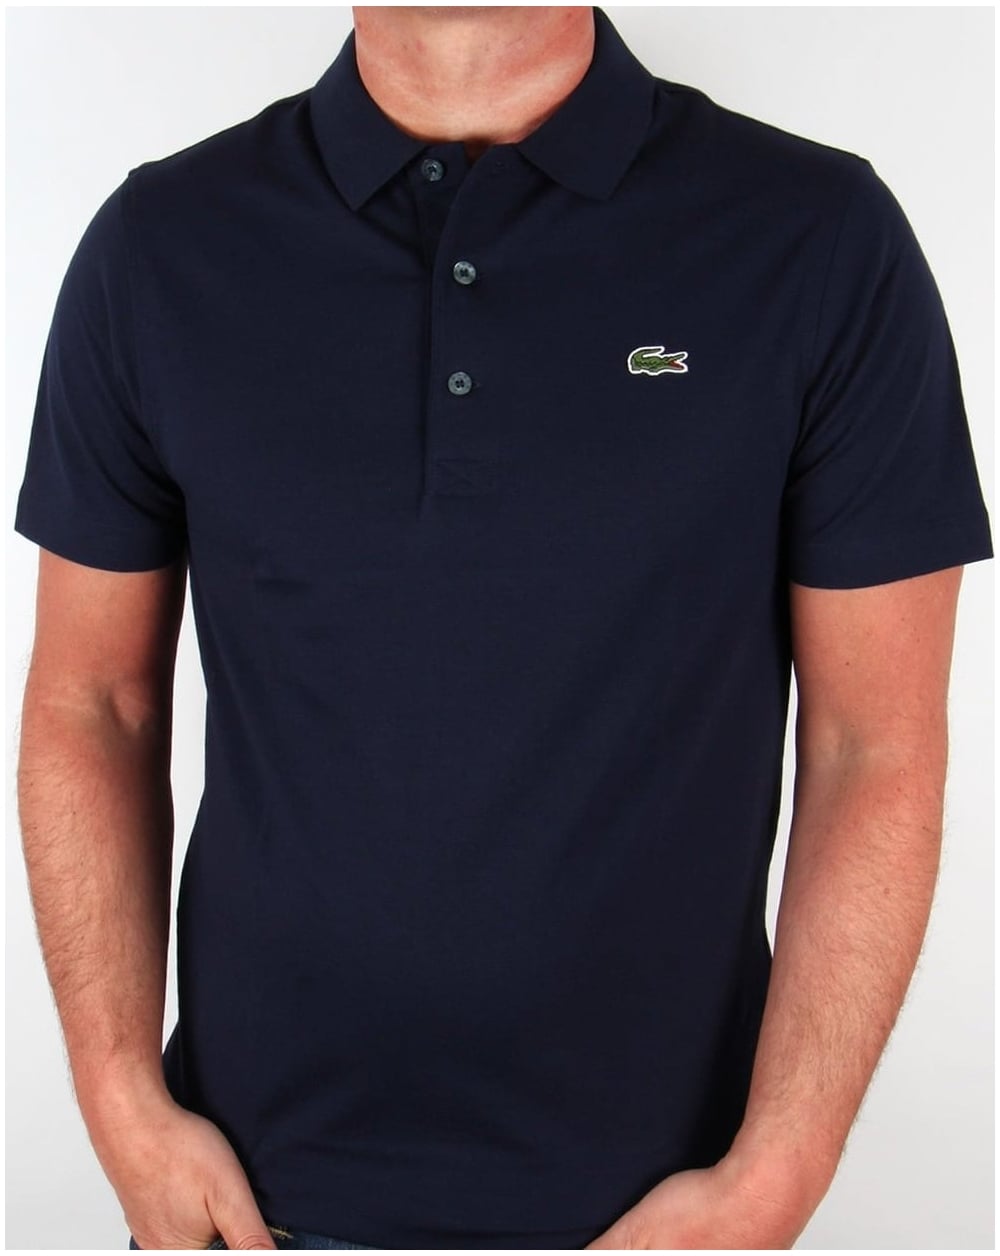 Lacoste polo shirt – Classic leisure fashion for high demands